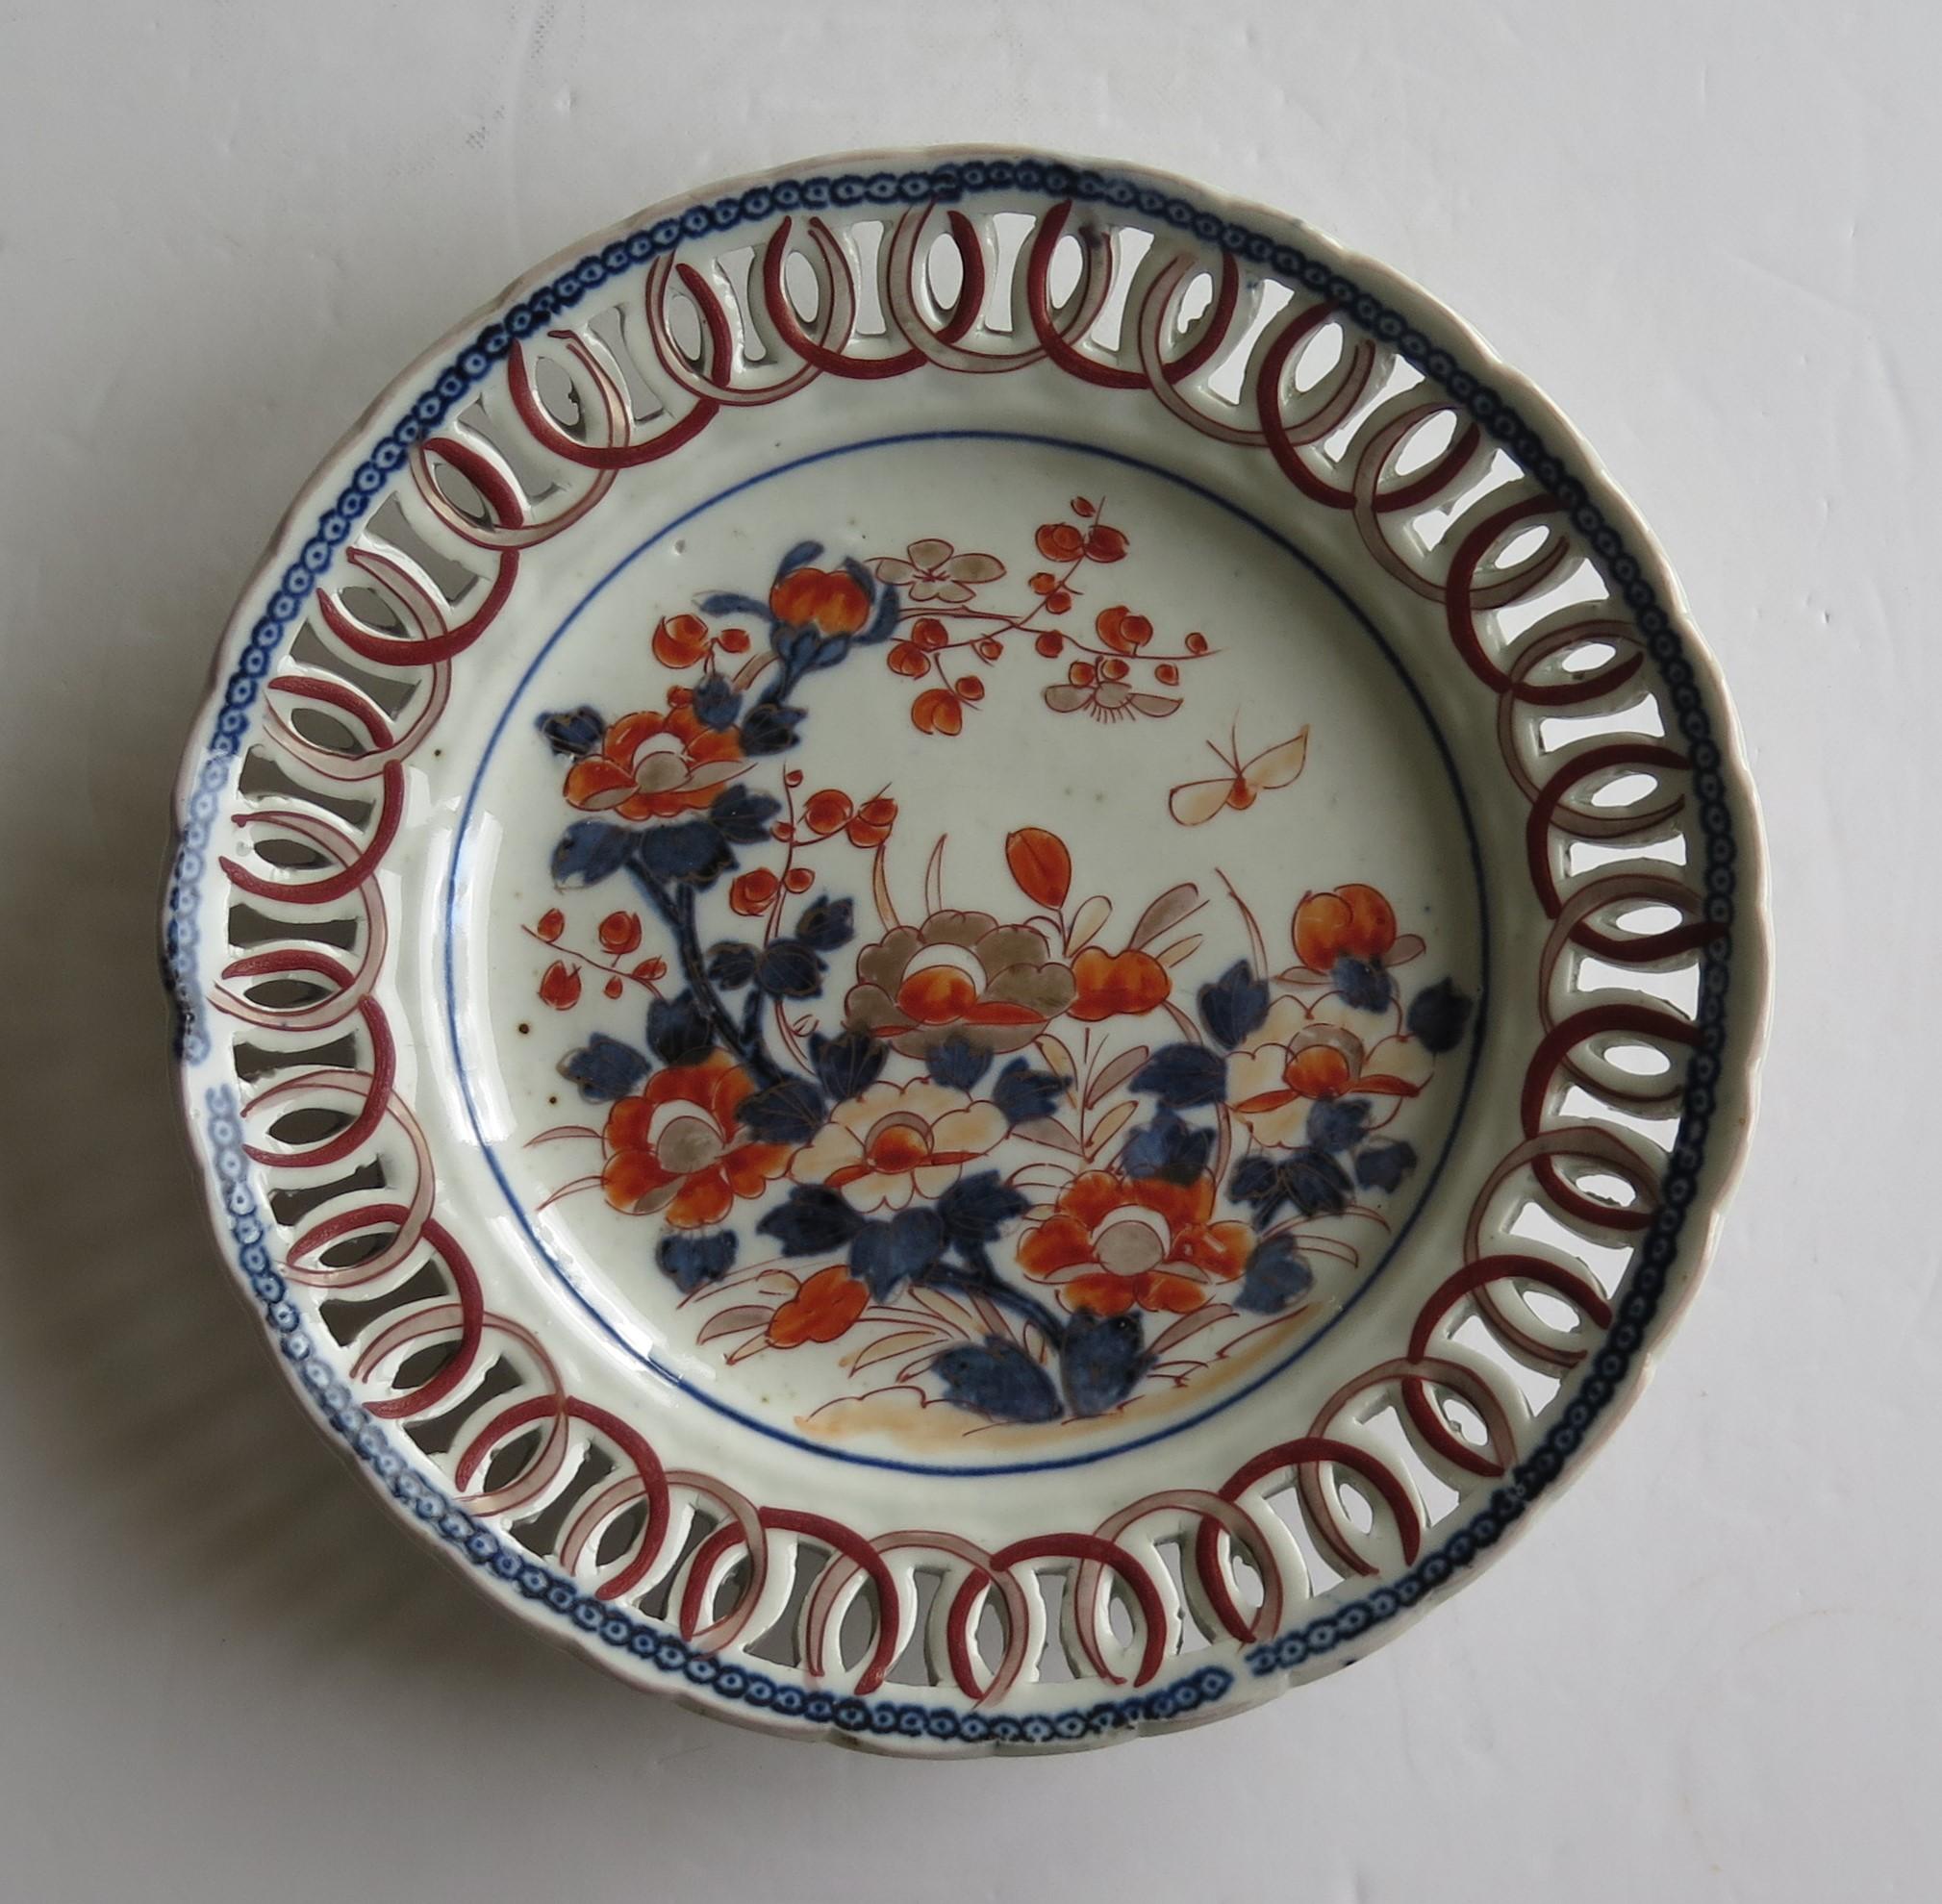 19th Century Japanese Porcelain Reticulated Plate or Dish Hand Painted, Edo Period circa 1820